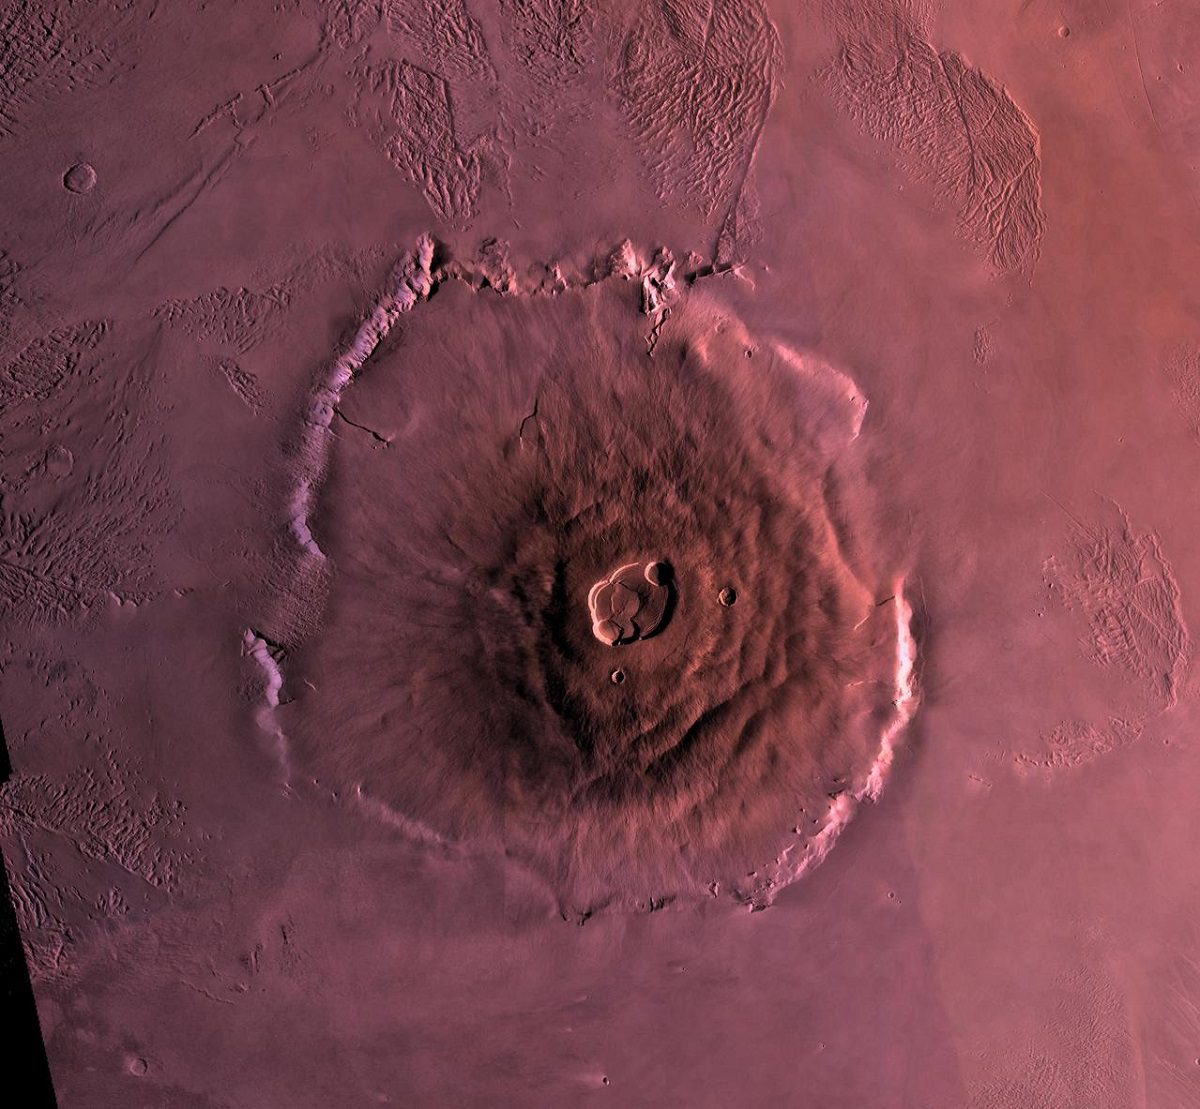 Largest volcano in the solar system - NASA photos on Silver Magazine www.silvermagazine.co.uk